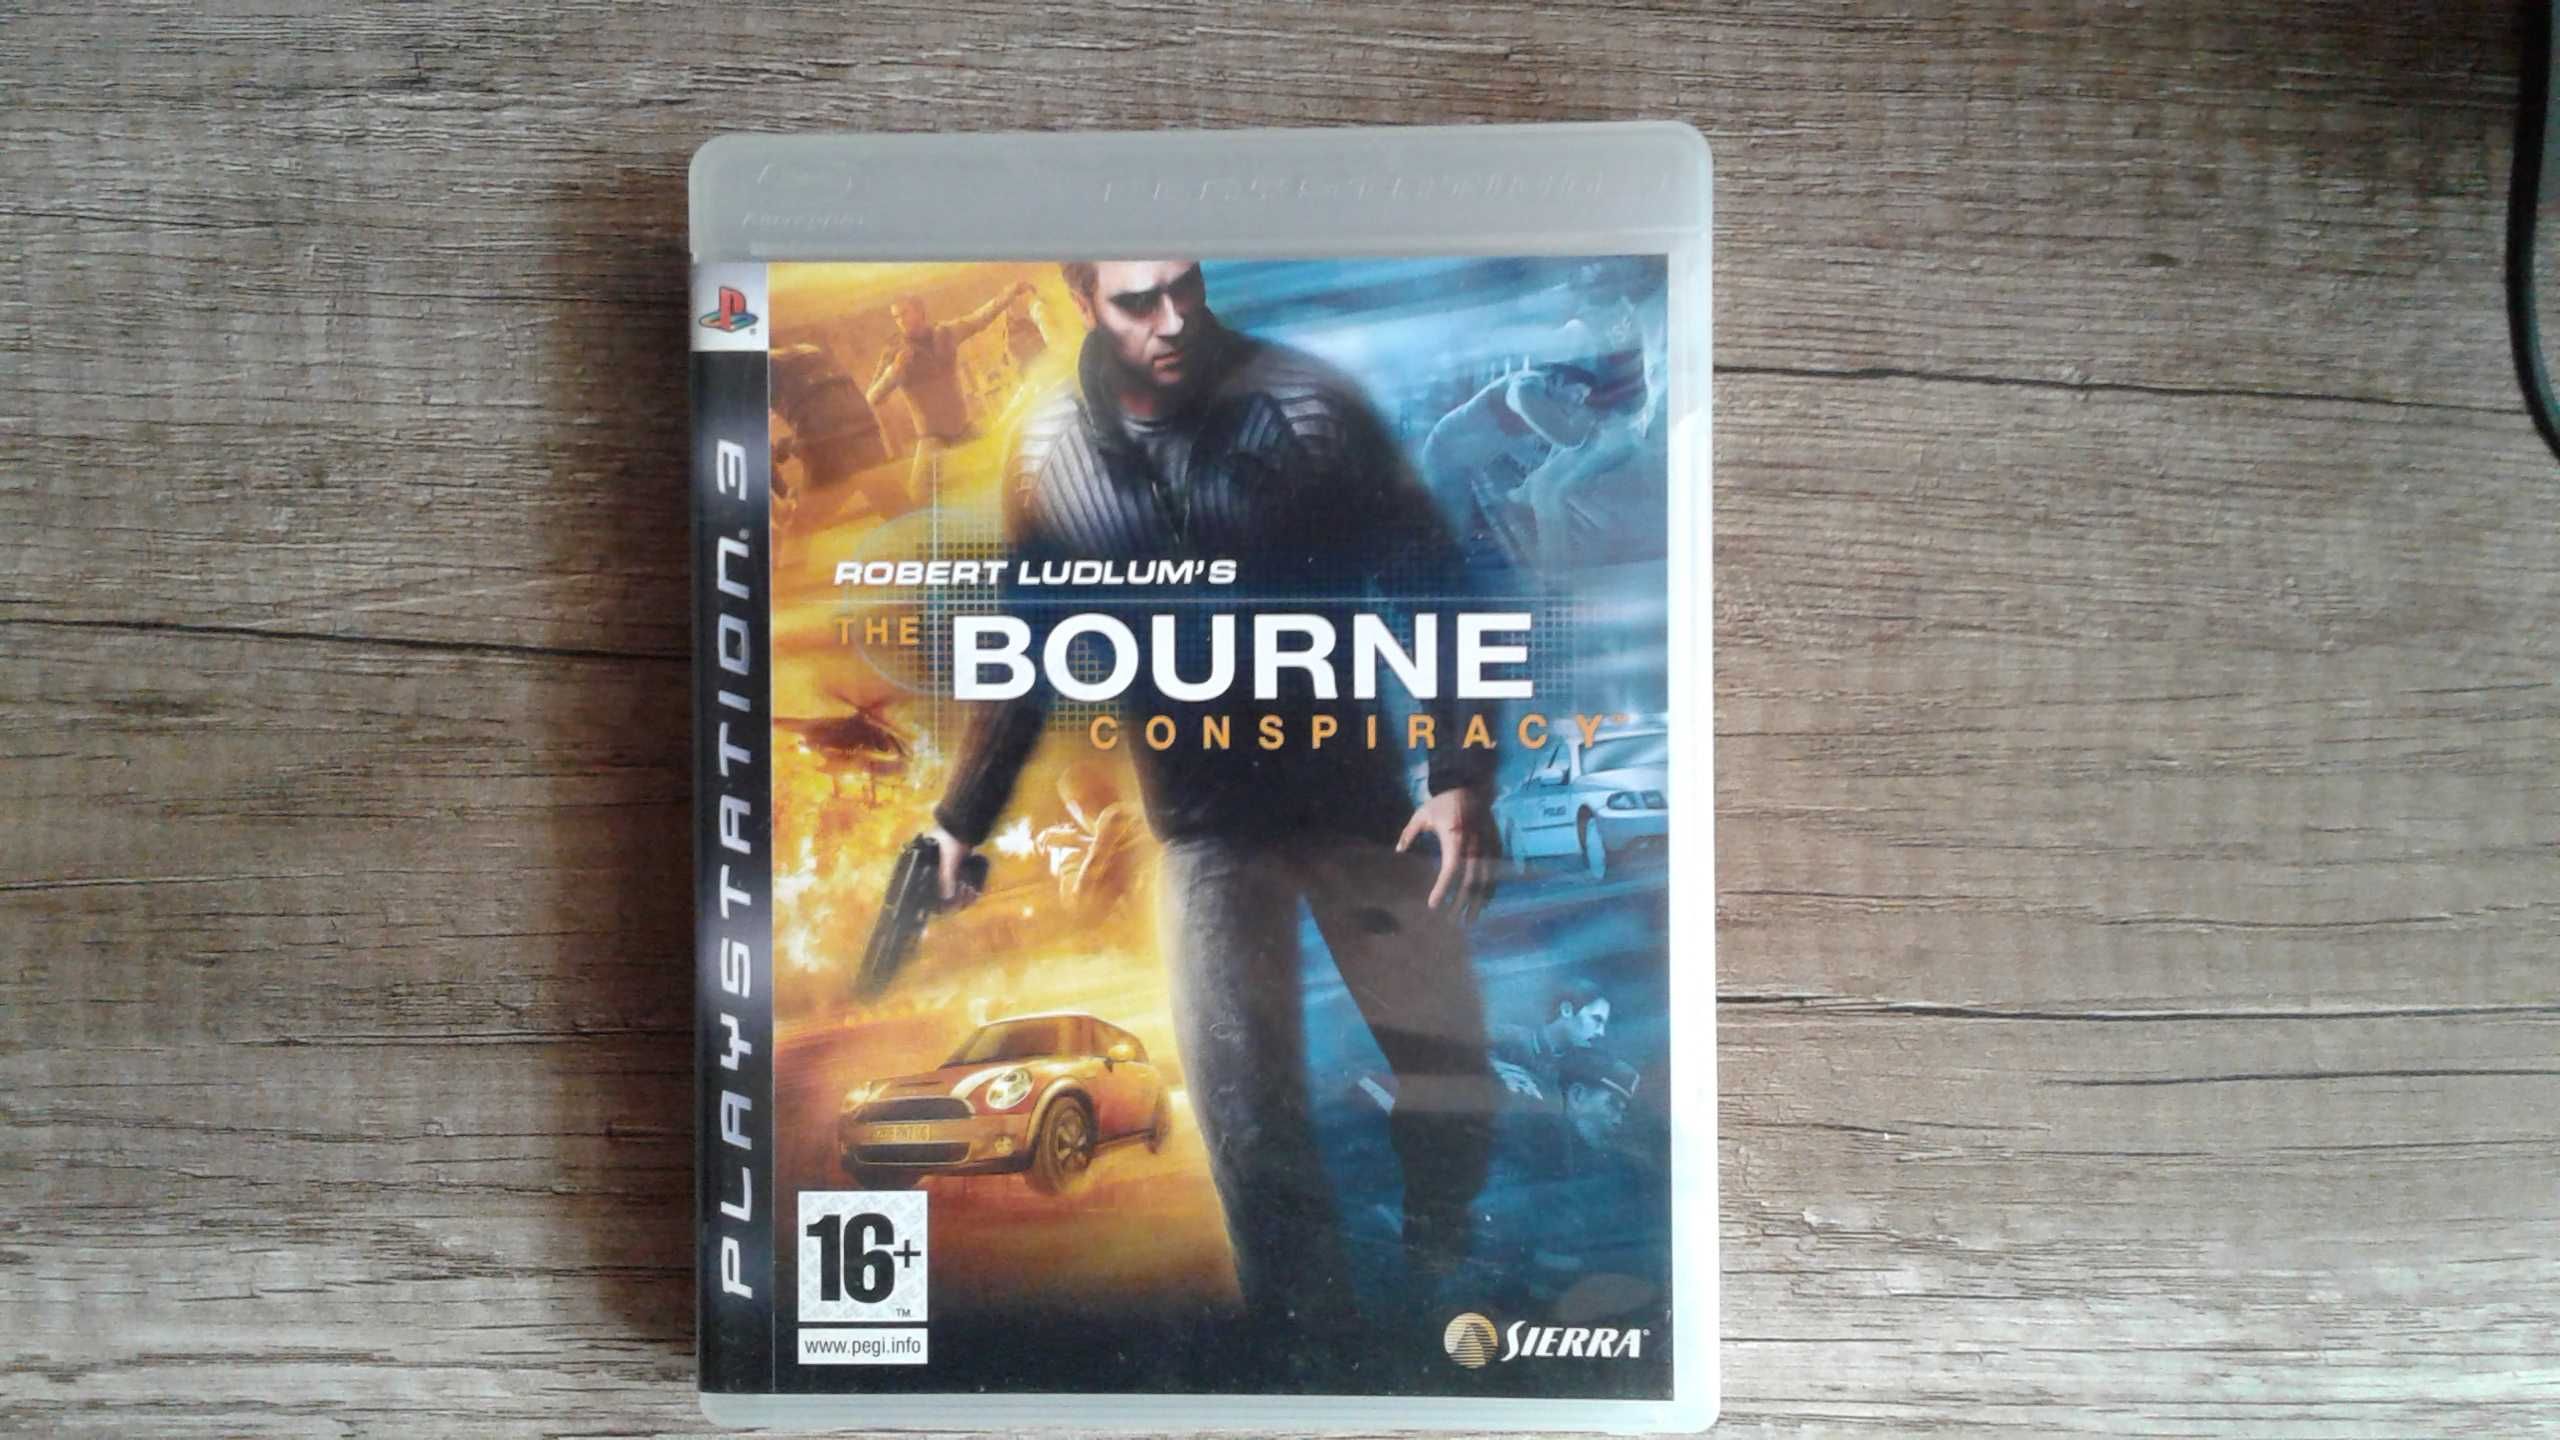 The Bourne Conspiracy Playstation 3